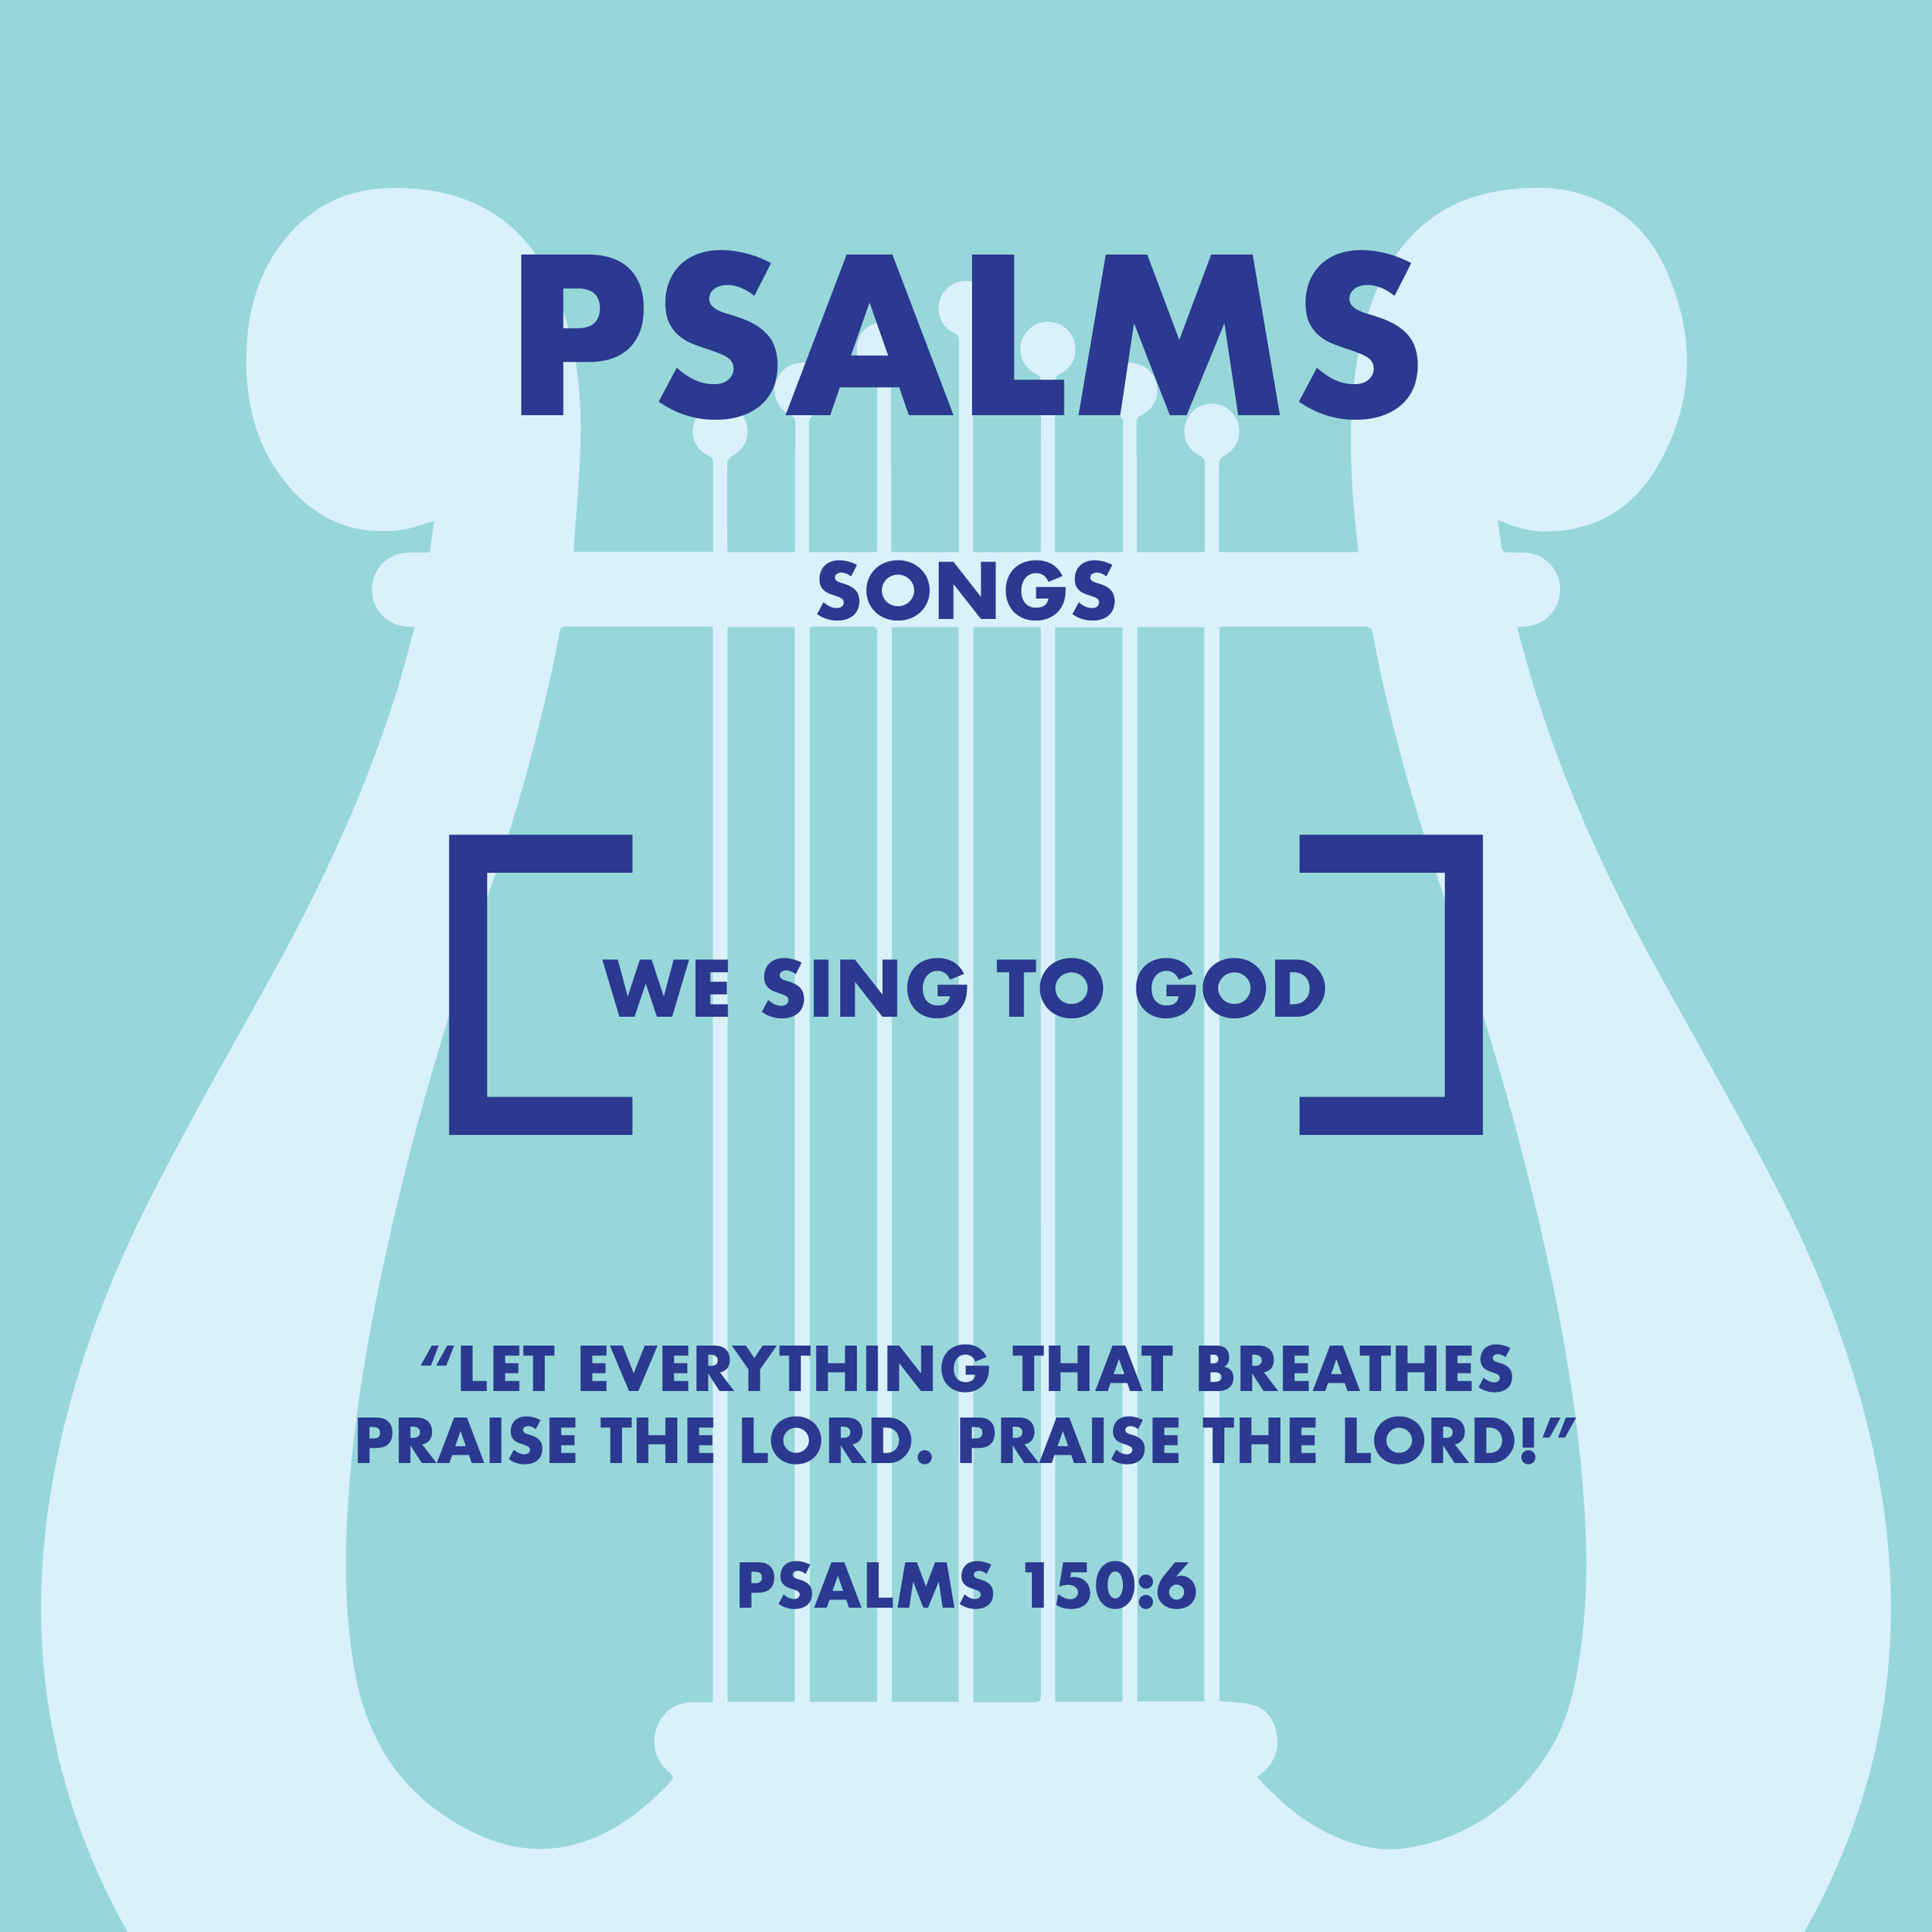 Books of the Bible_posters_17 Psalms.png